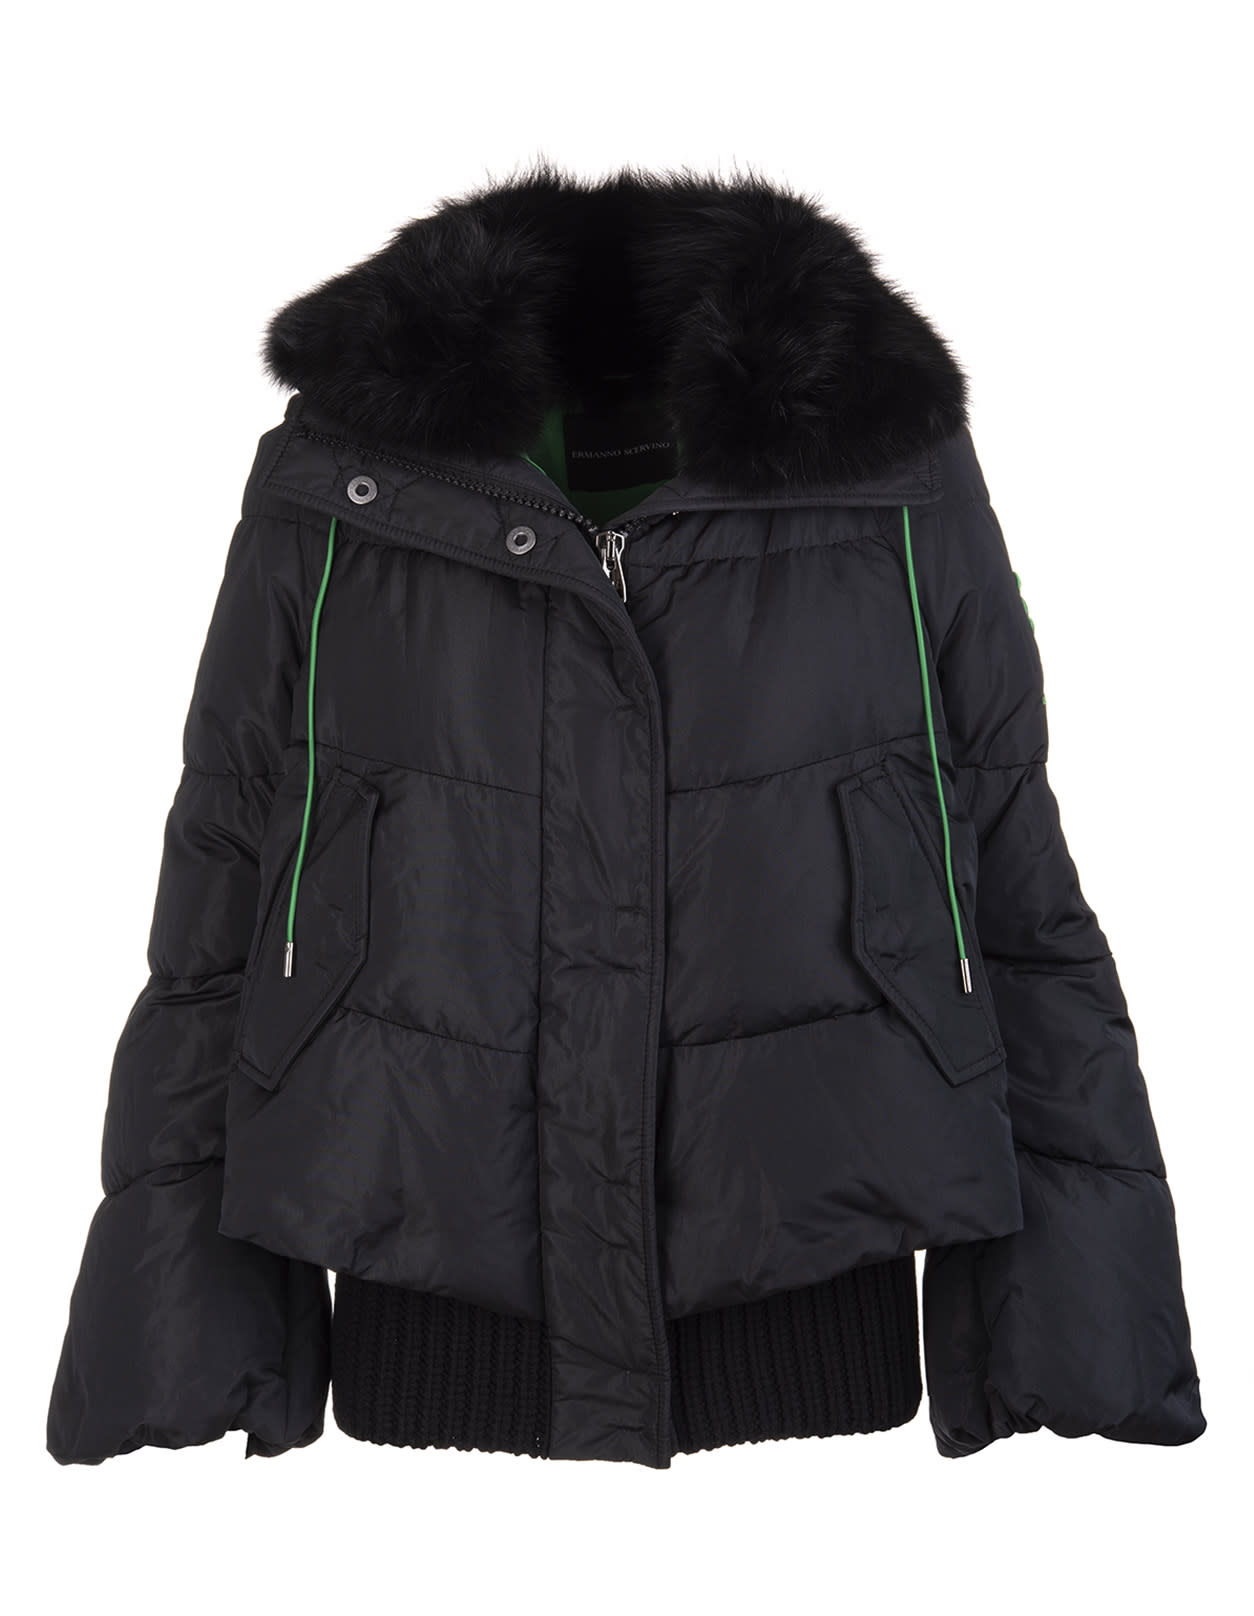 Ermanno Scervino Black And Green Short Down Jacket In Taffeta And Nylon With Fox Fur